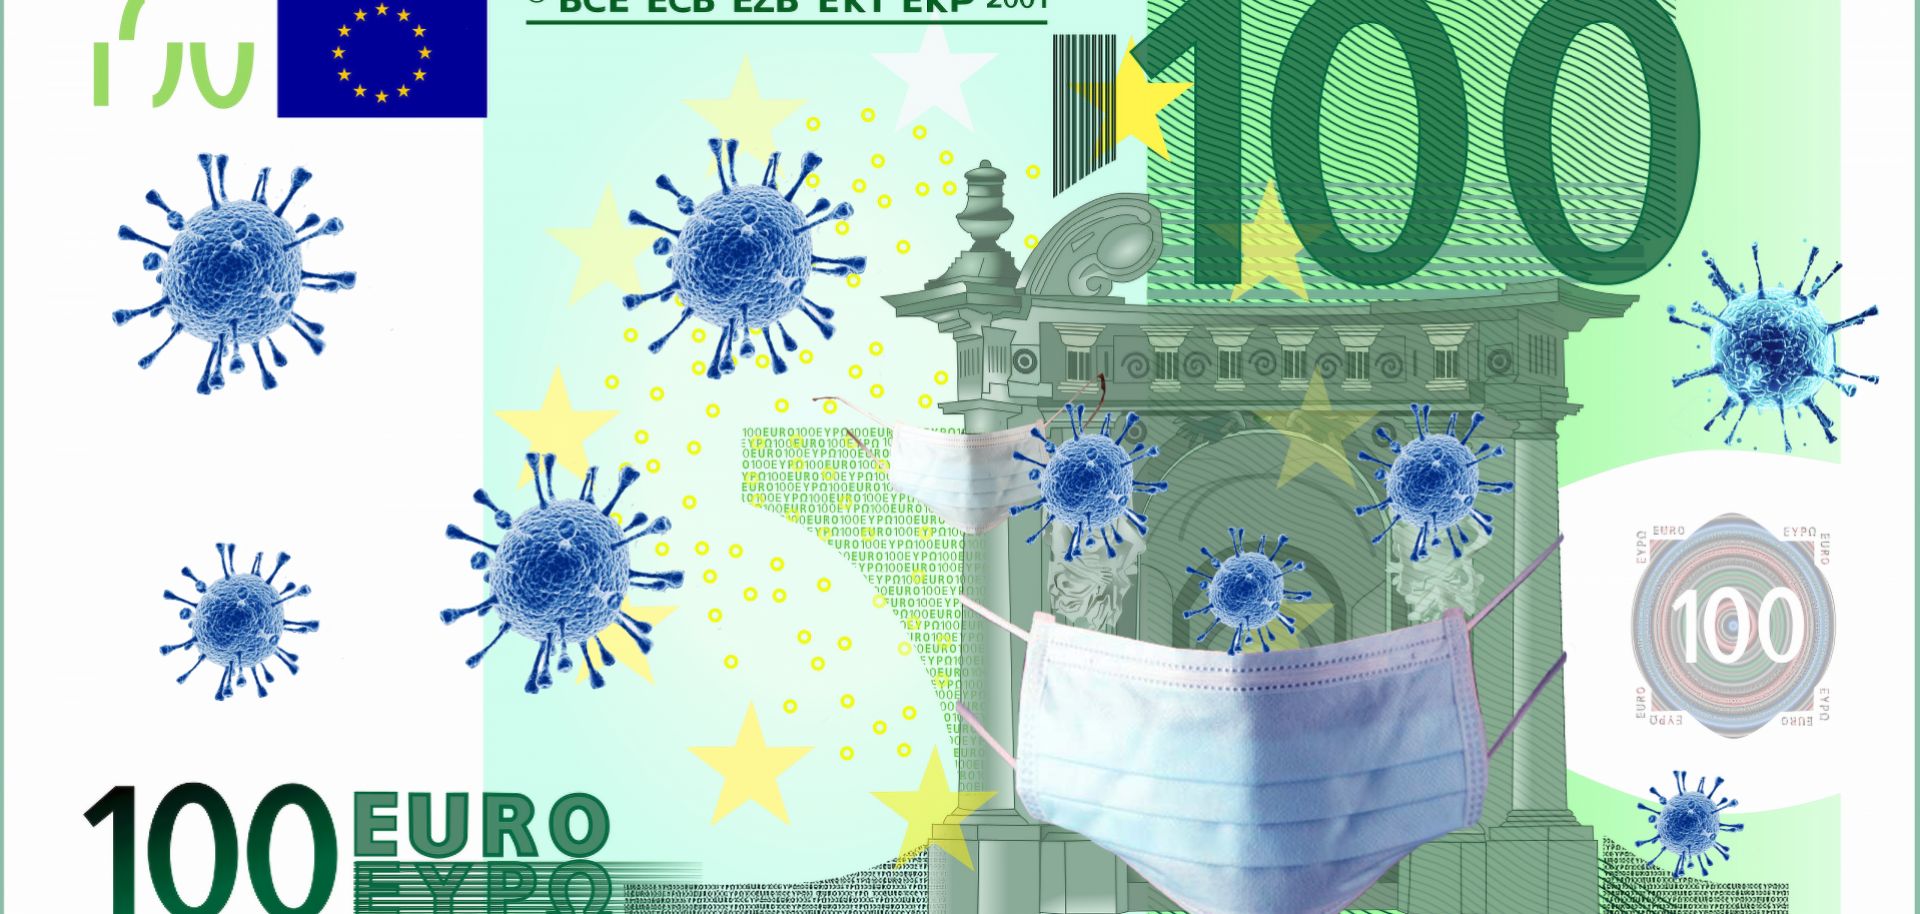 An illustration of a microscope image of the new coronavirus and a surgical mask overlaying a 100 euro banknote.